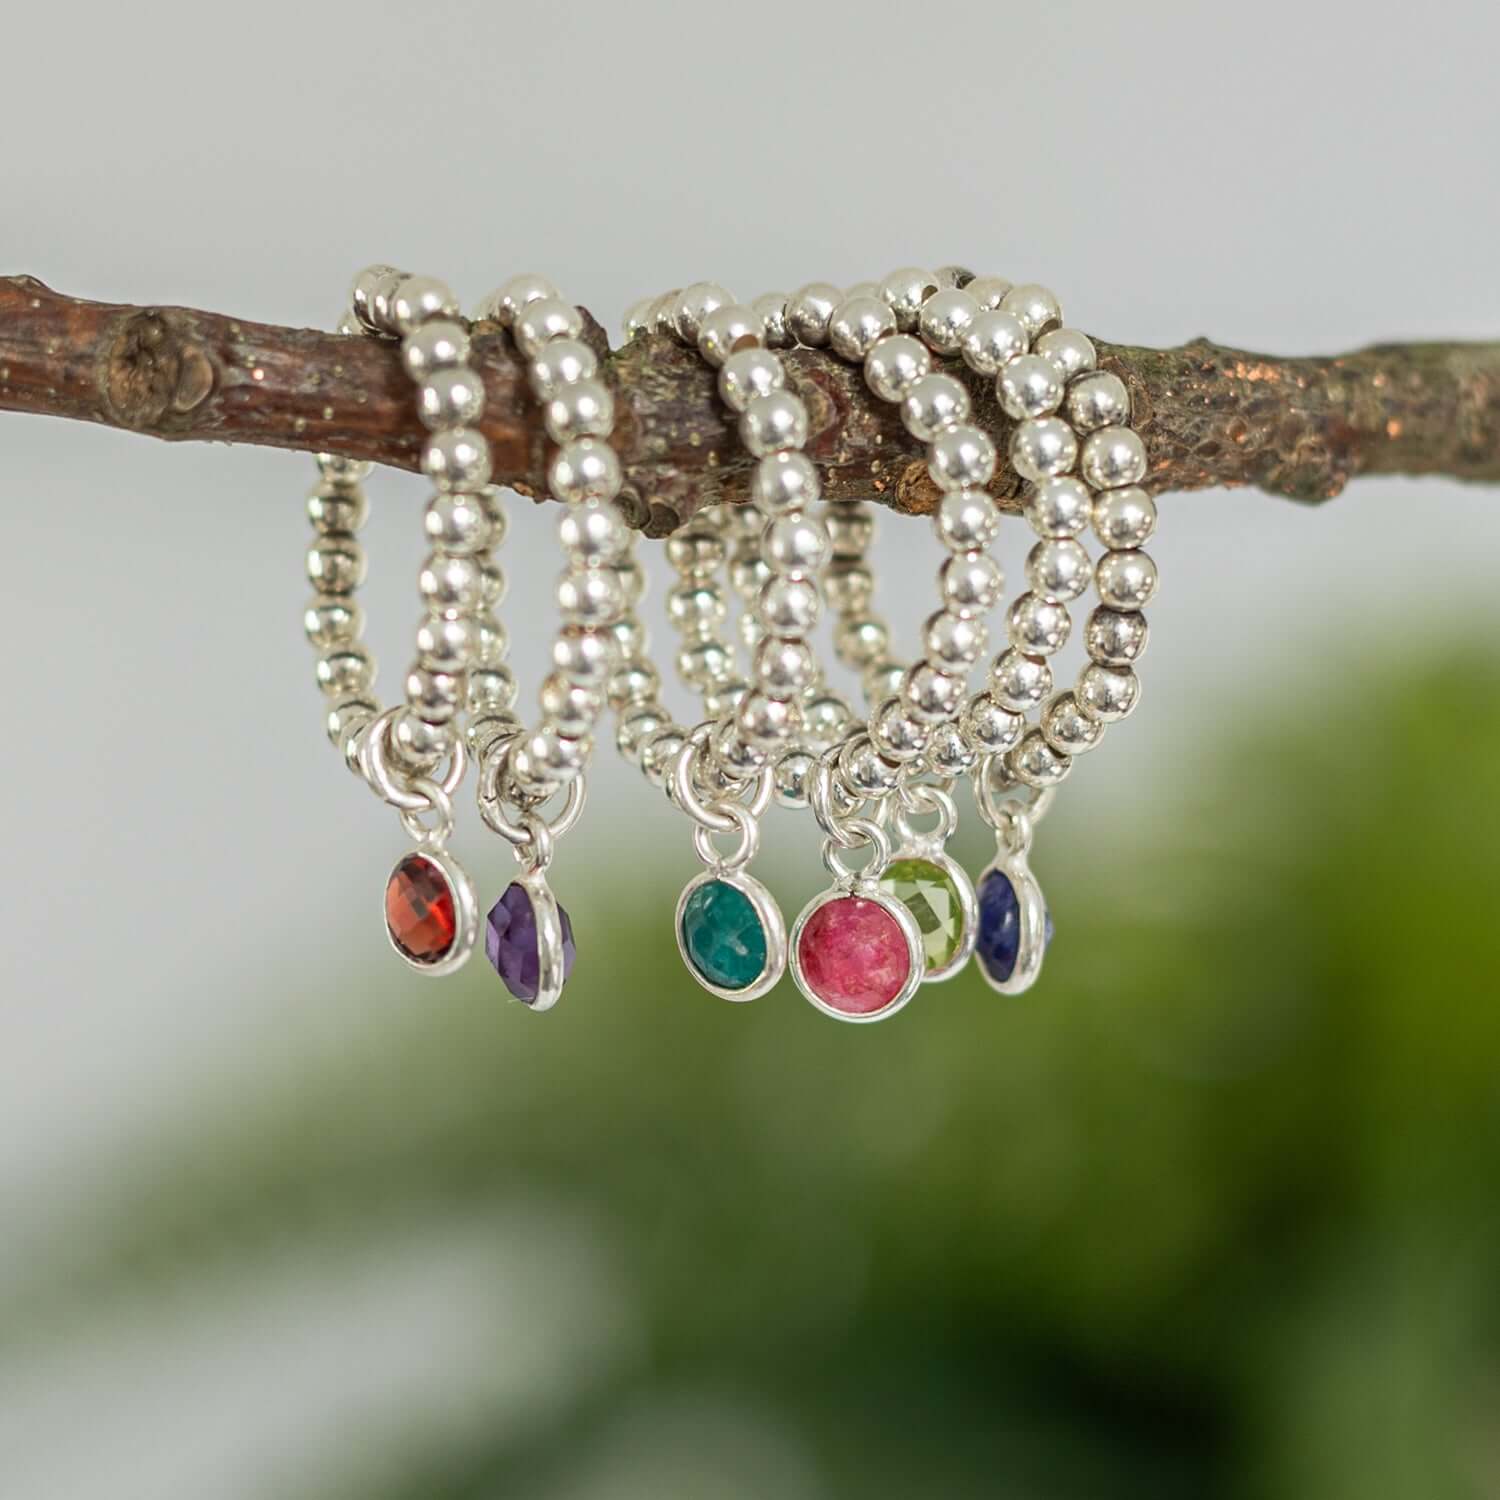 A group of silver beaded rings with colorful gemstone charms, representing birthstone jewellery uk, hanging on a tree branch. The rings feature gemstones in various colors, incl red, purple, green, pink, and blue, against a blurred green background